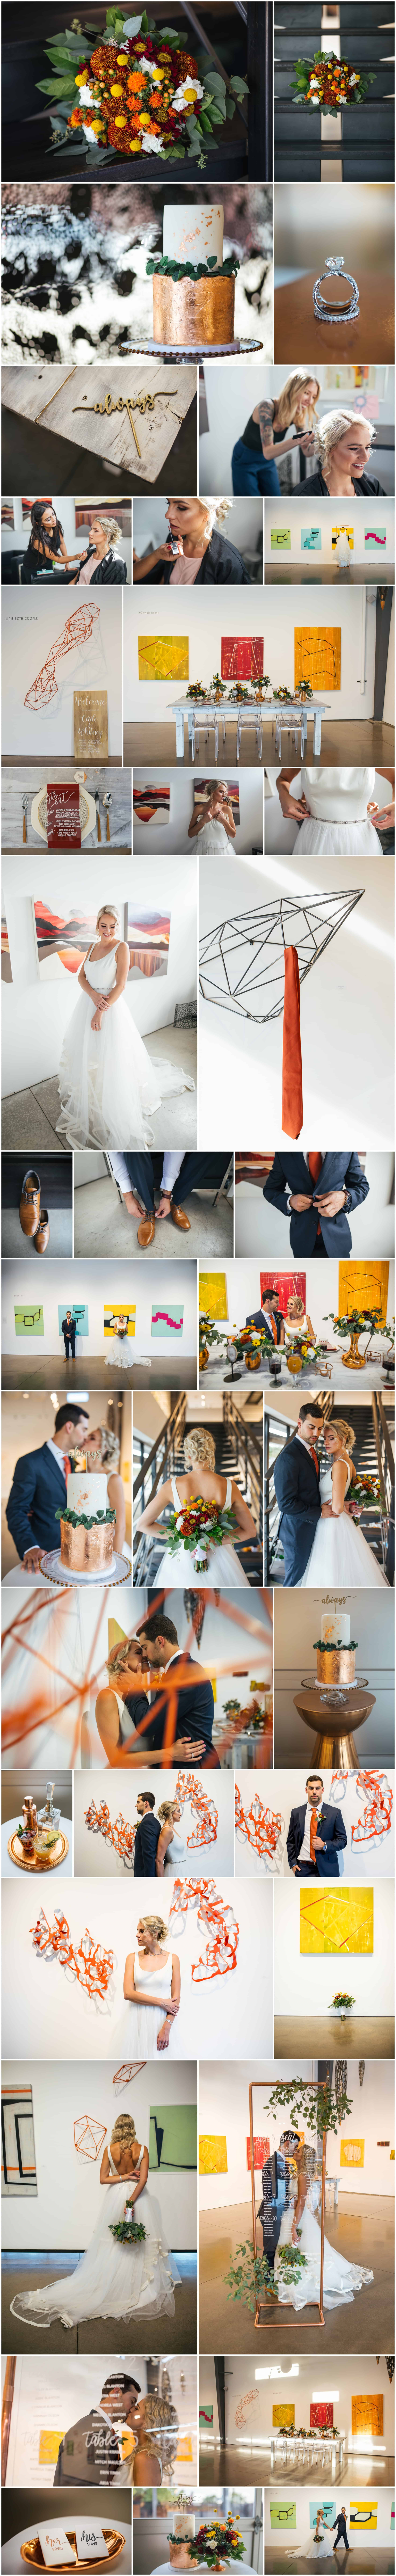 Space Gallery Styled Shoot